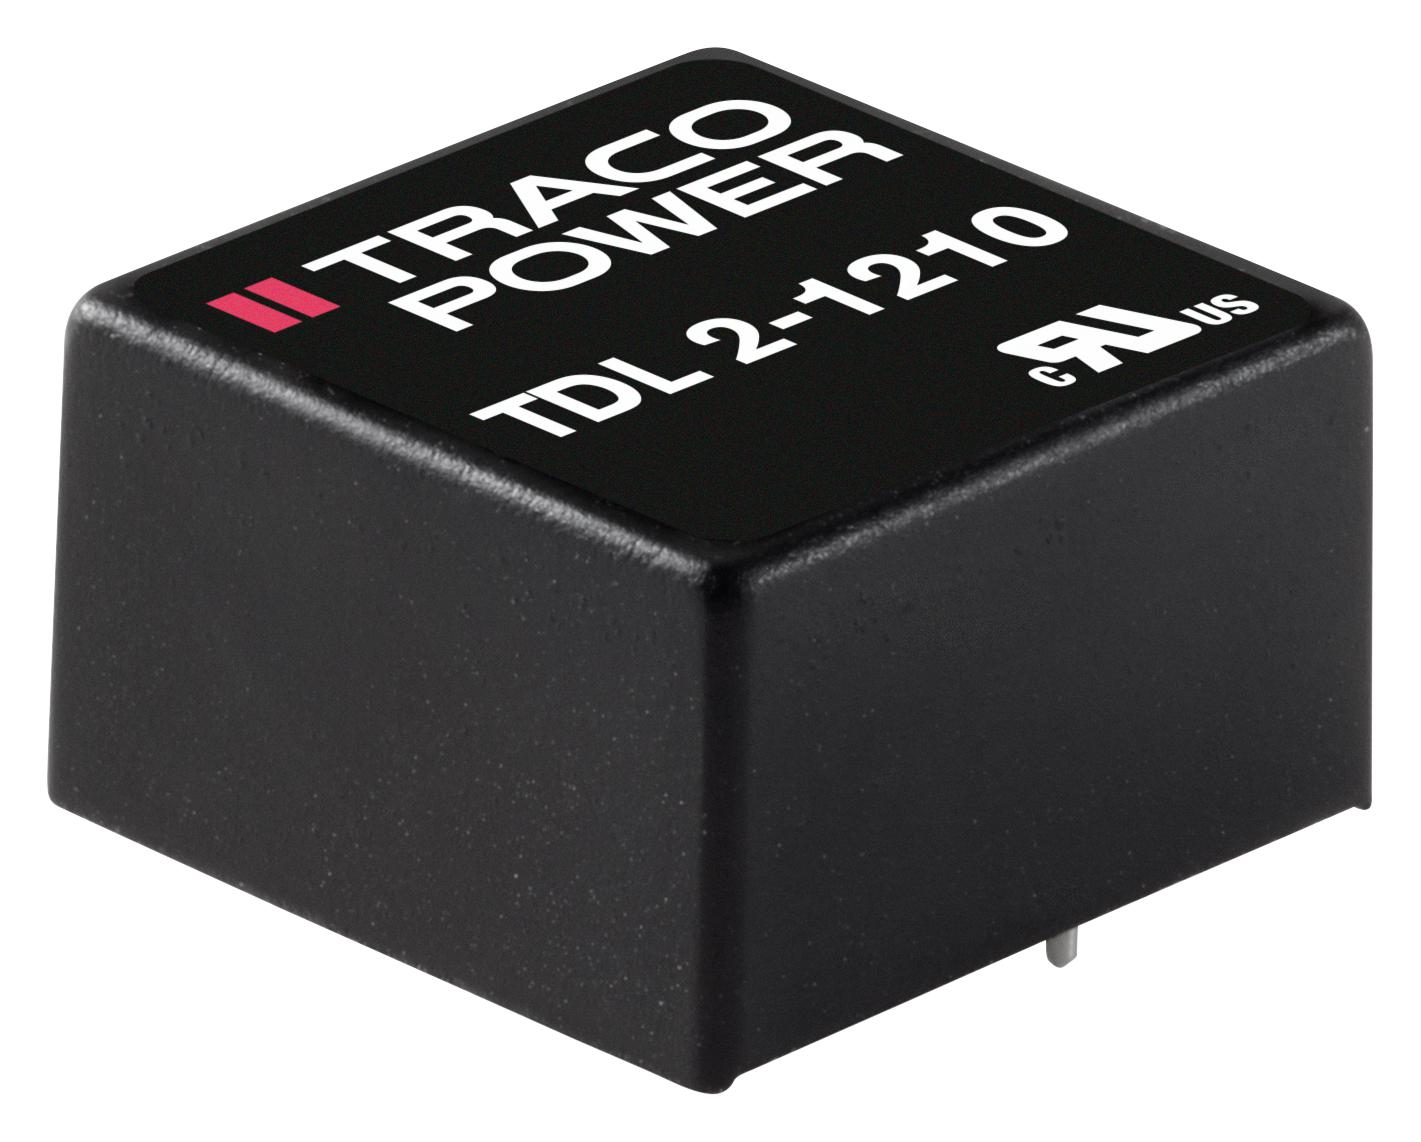 TDL 2-0521 DC-DC CONVERTER, 2 O/P, 2W TRACO POWER